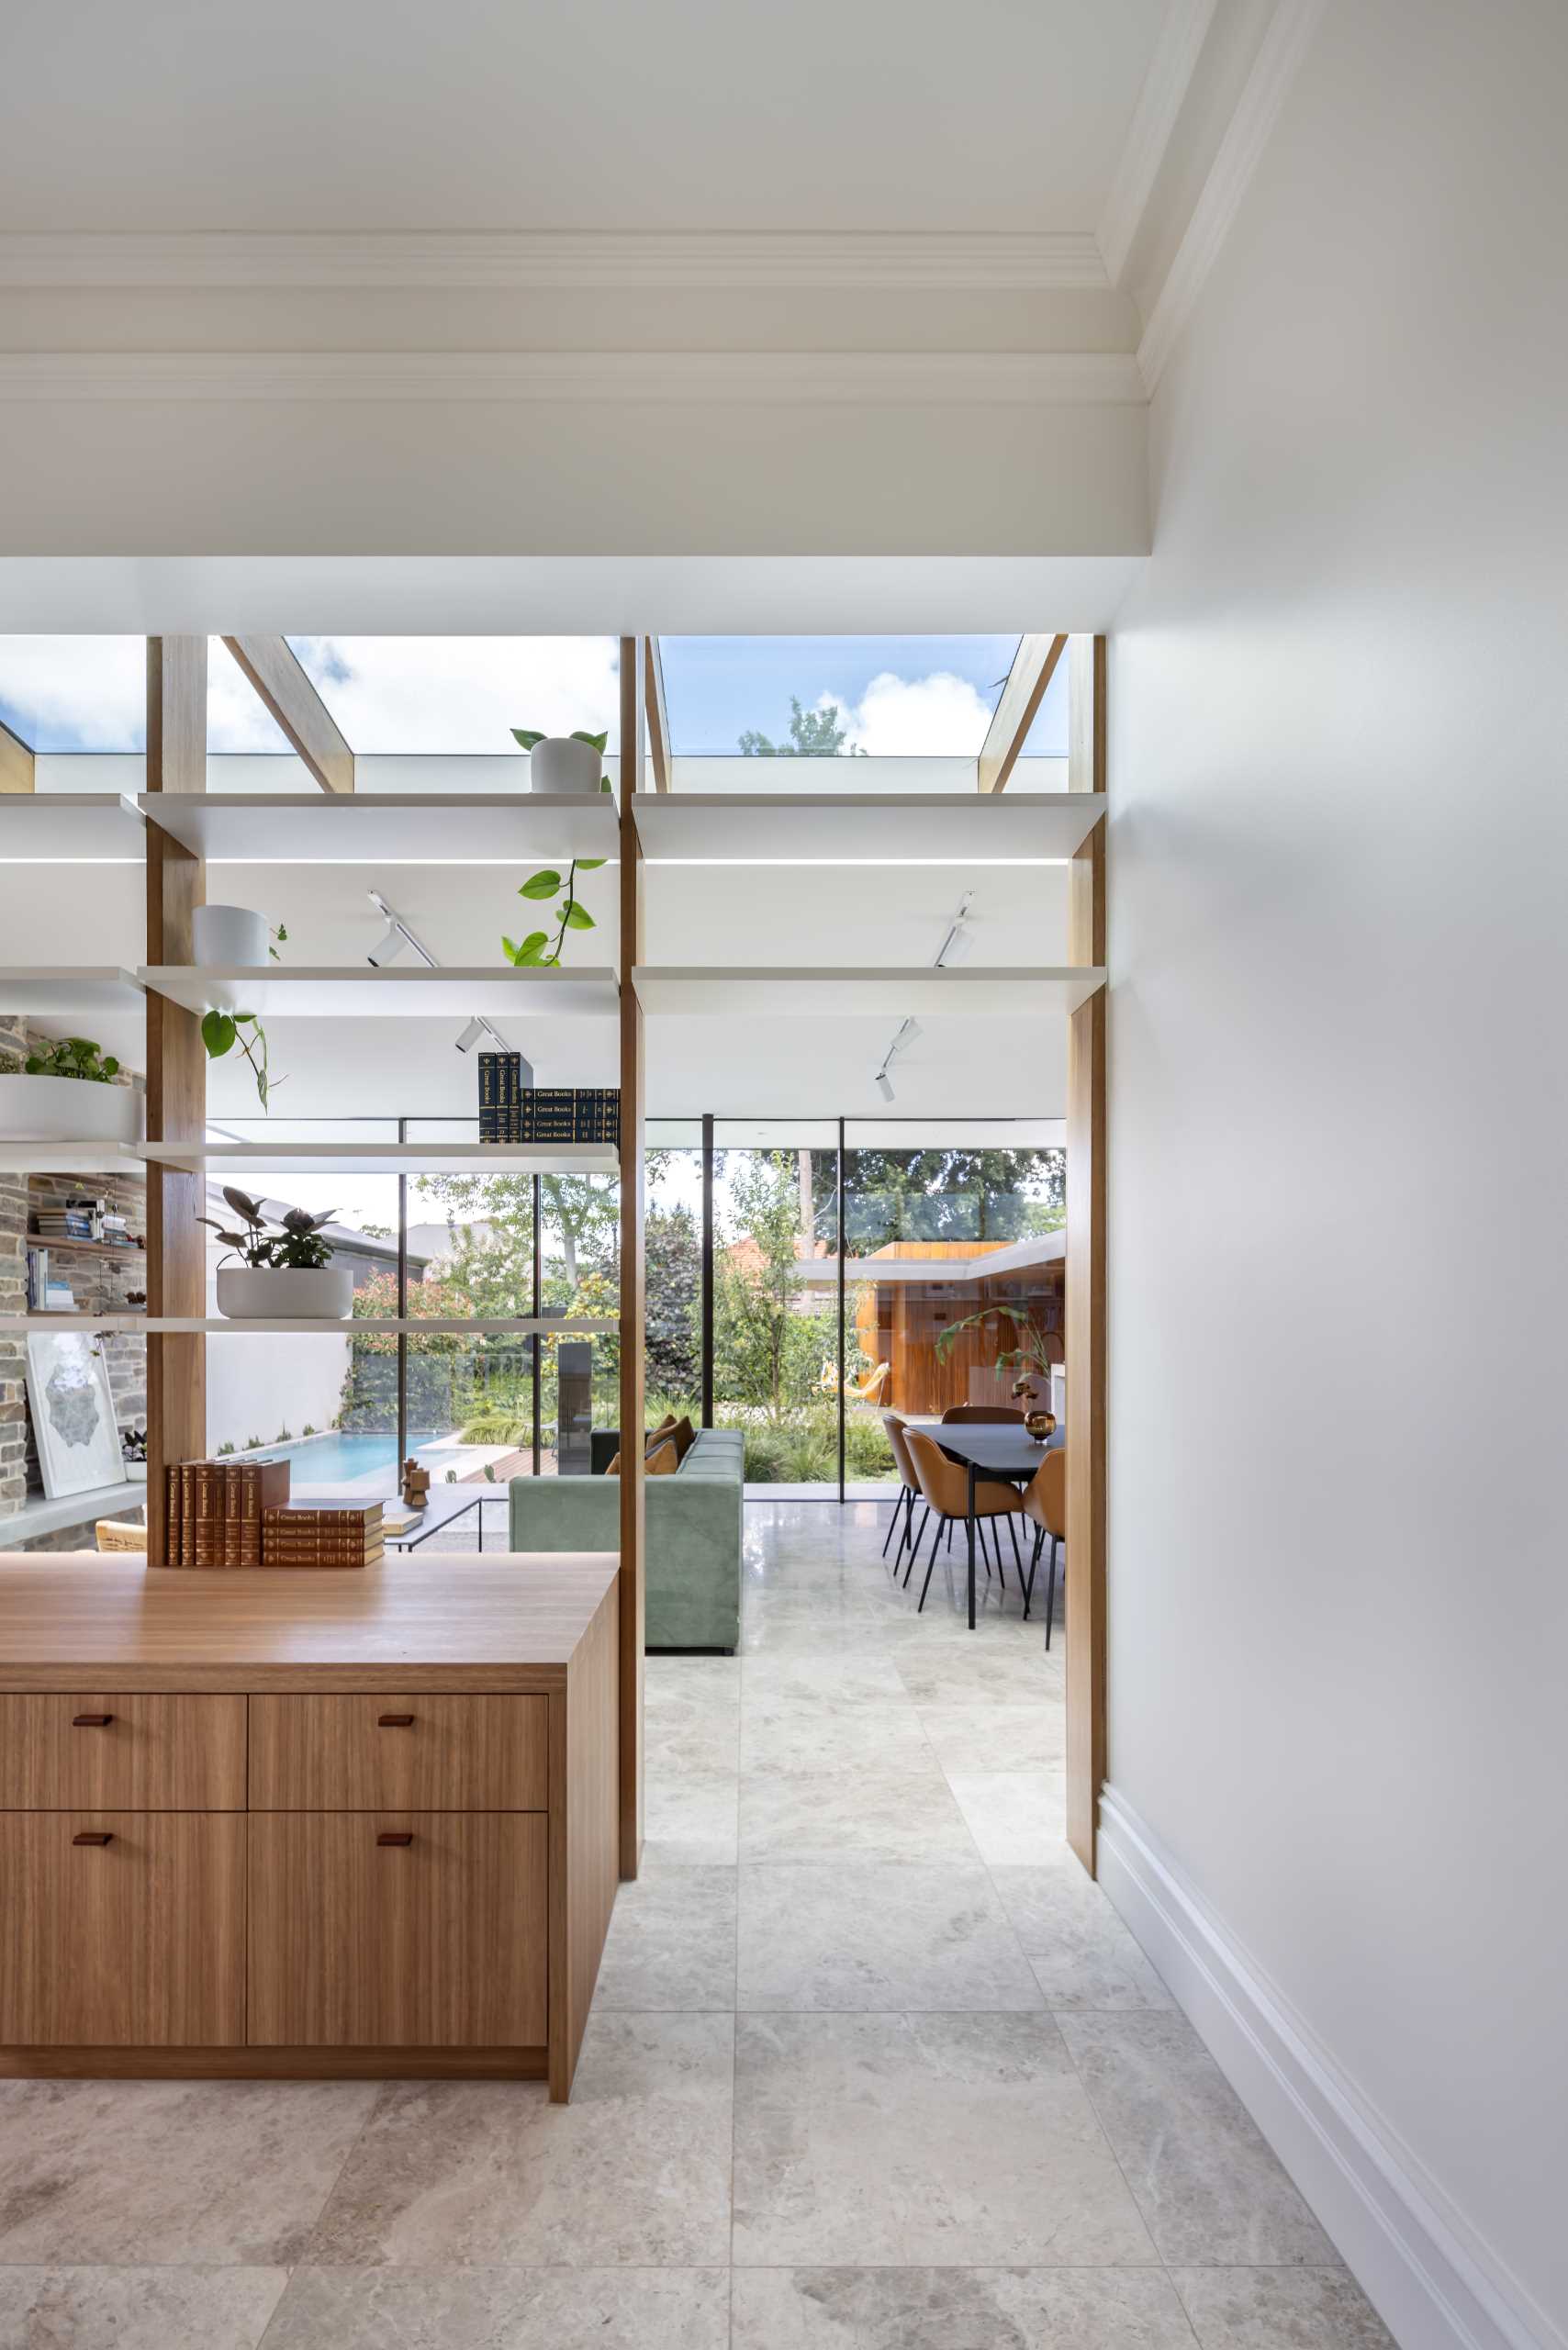 An open wall of shelving below a skylight separates the living room from a ،me office.